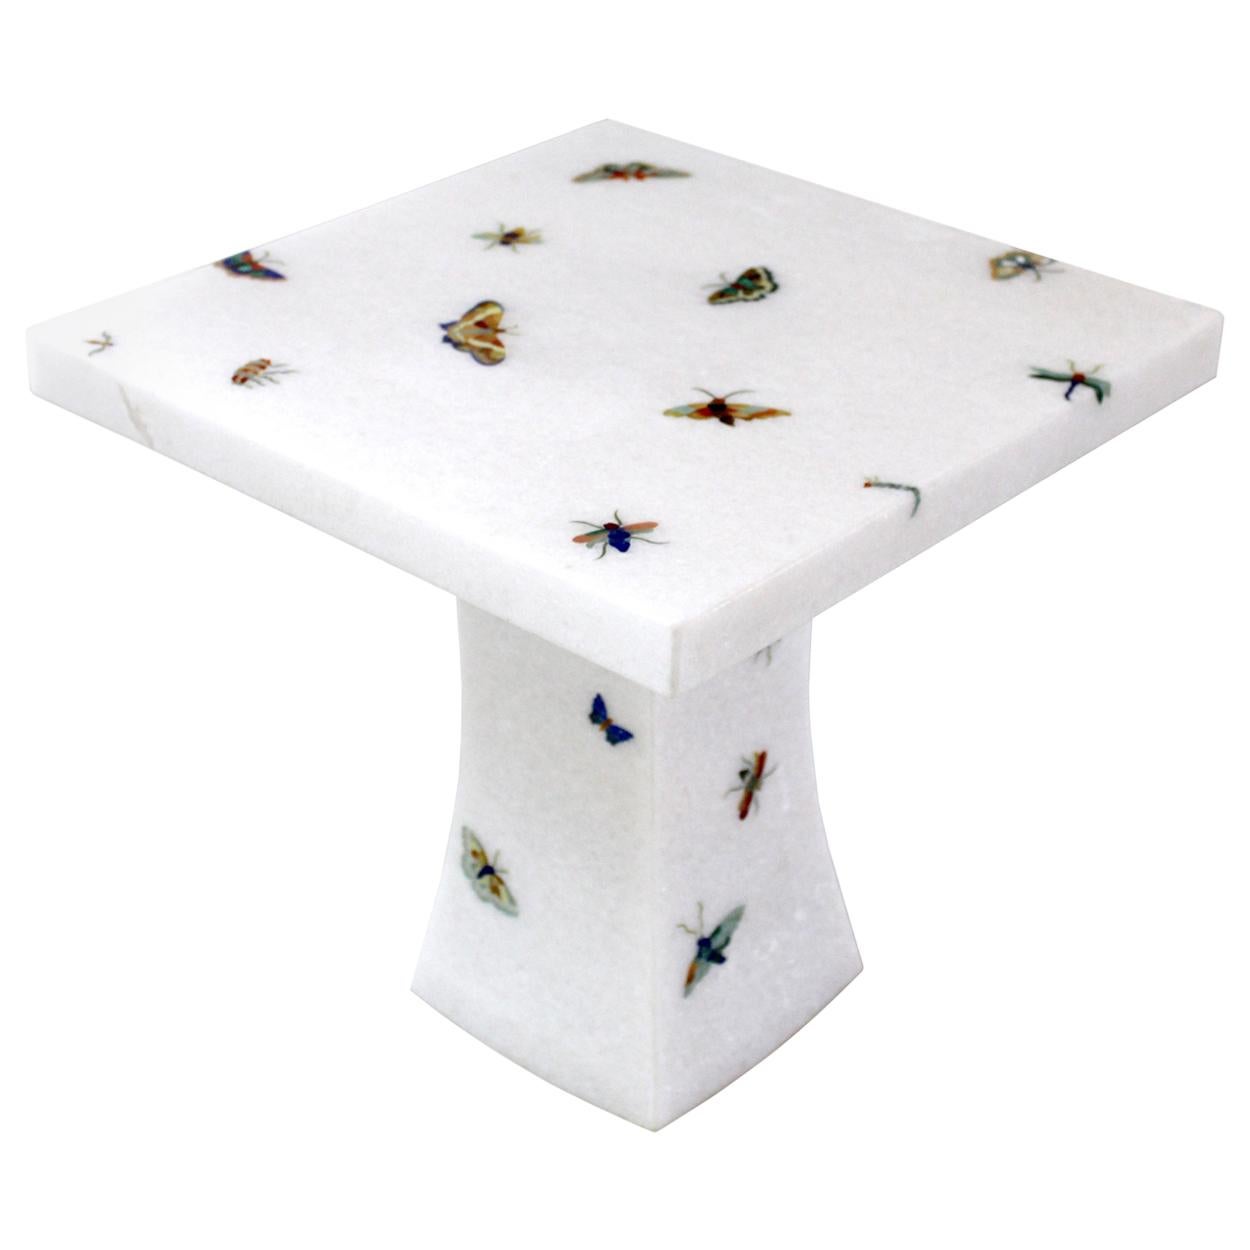 What is a butterfly table?